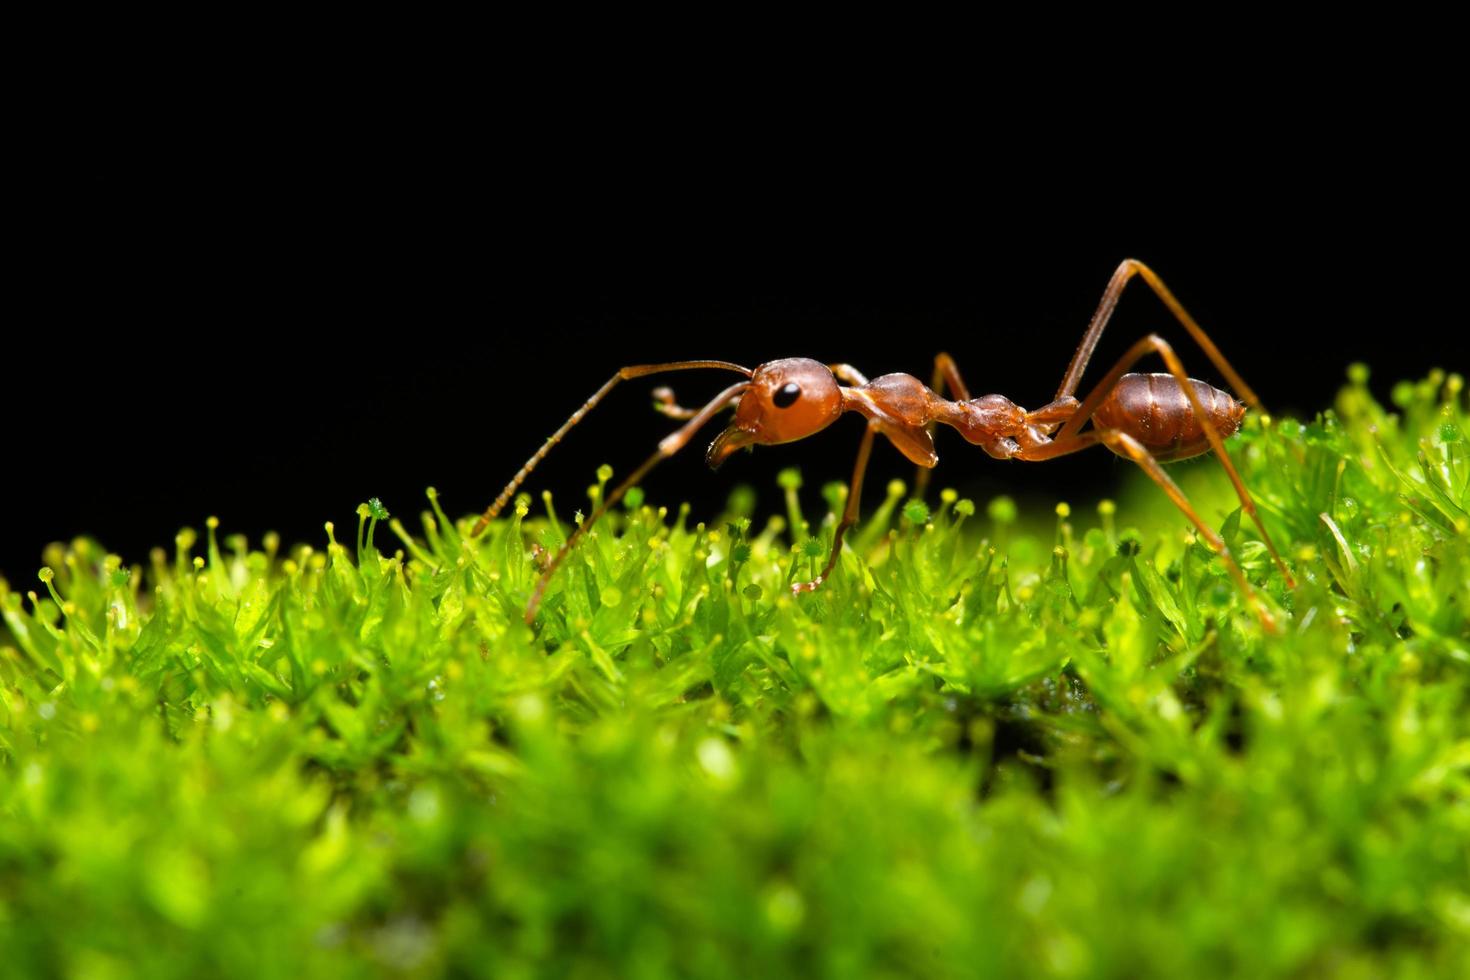 Ant in the grass photo